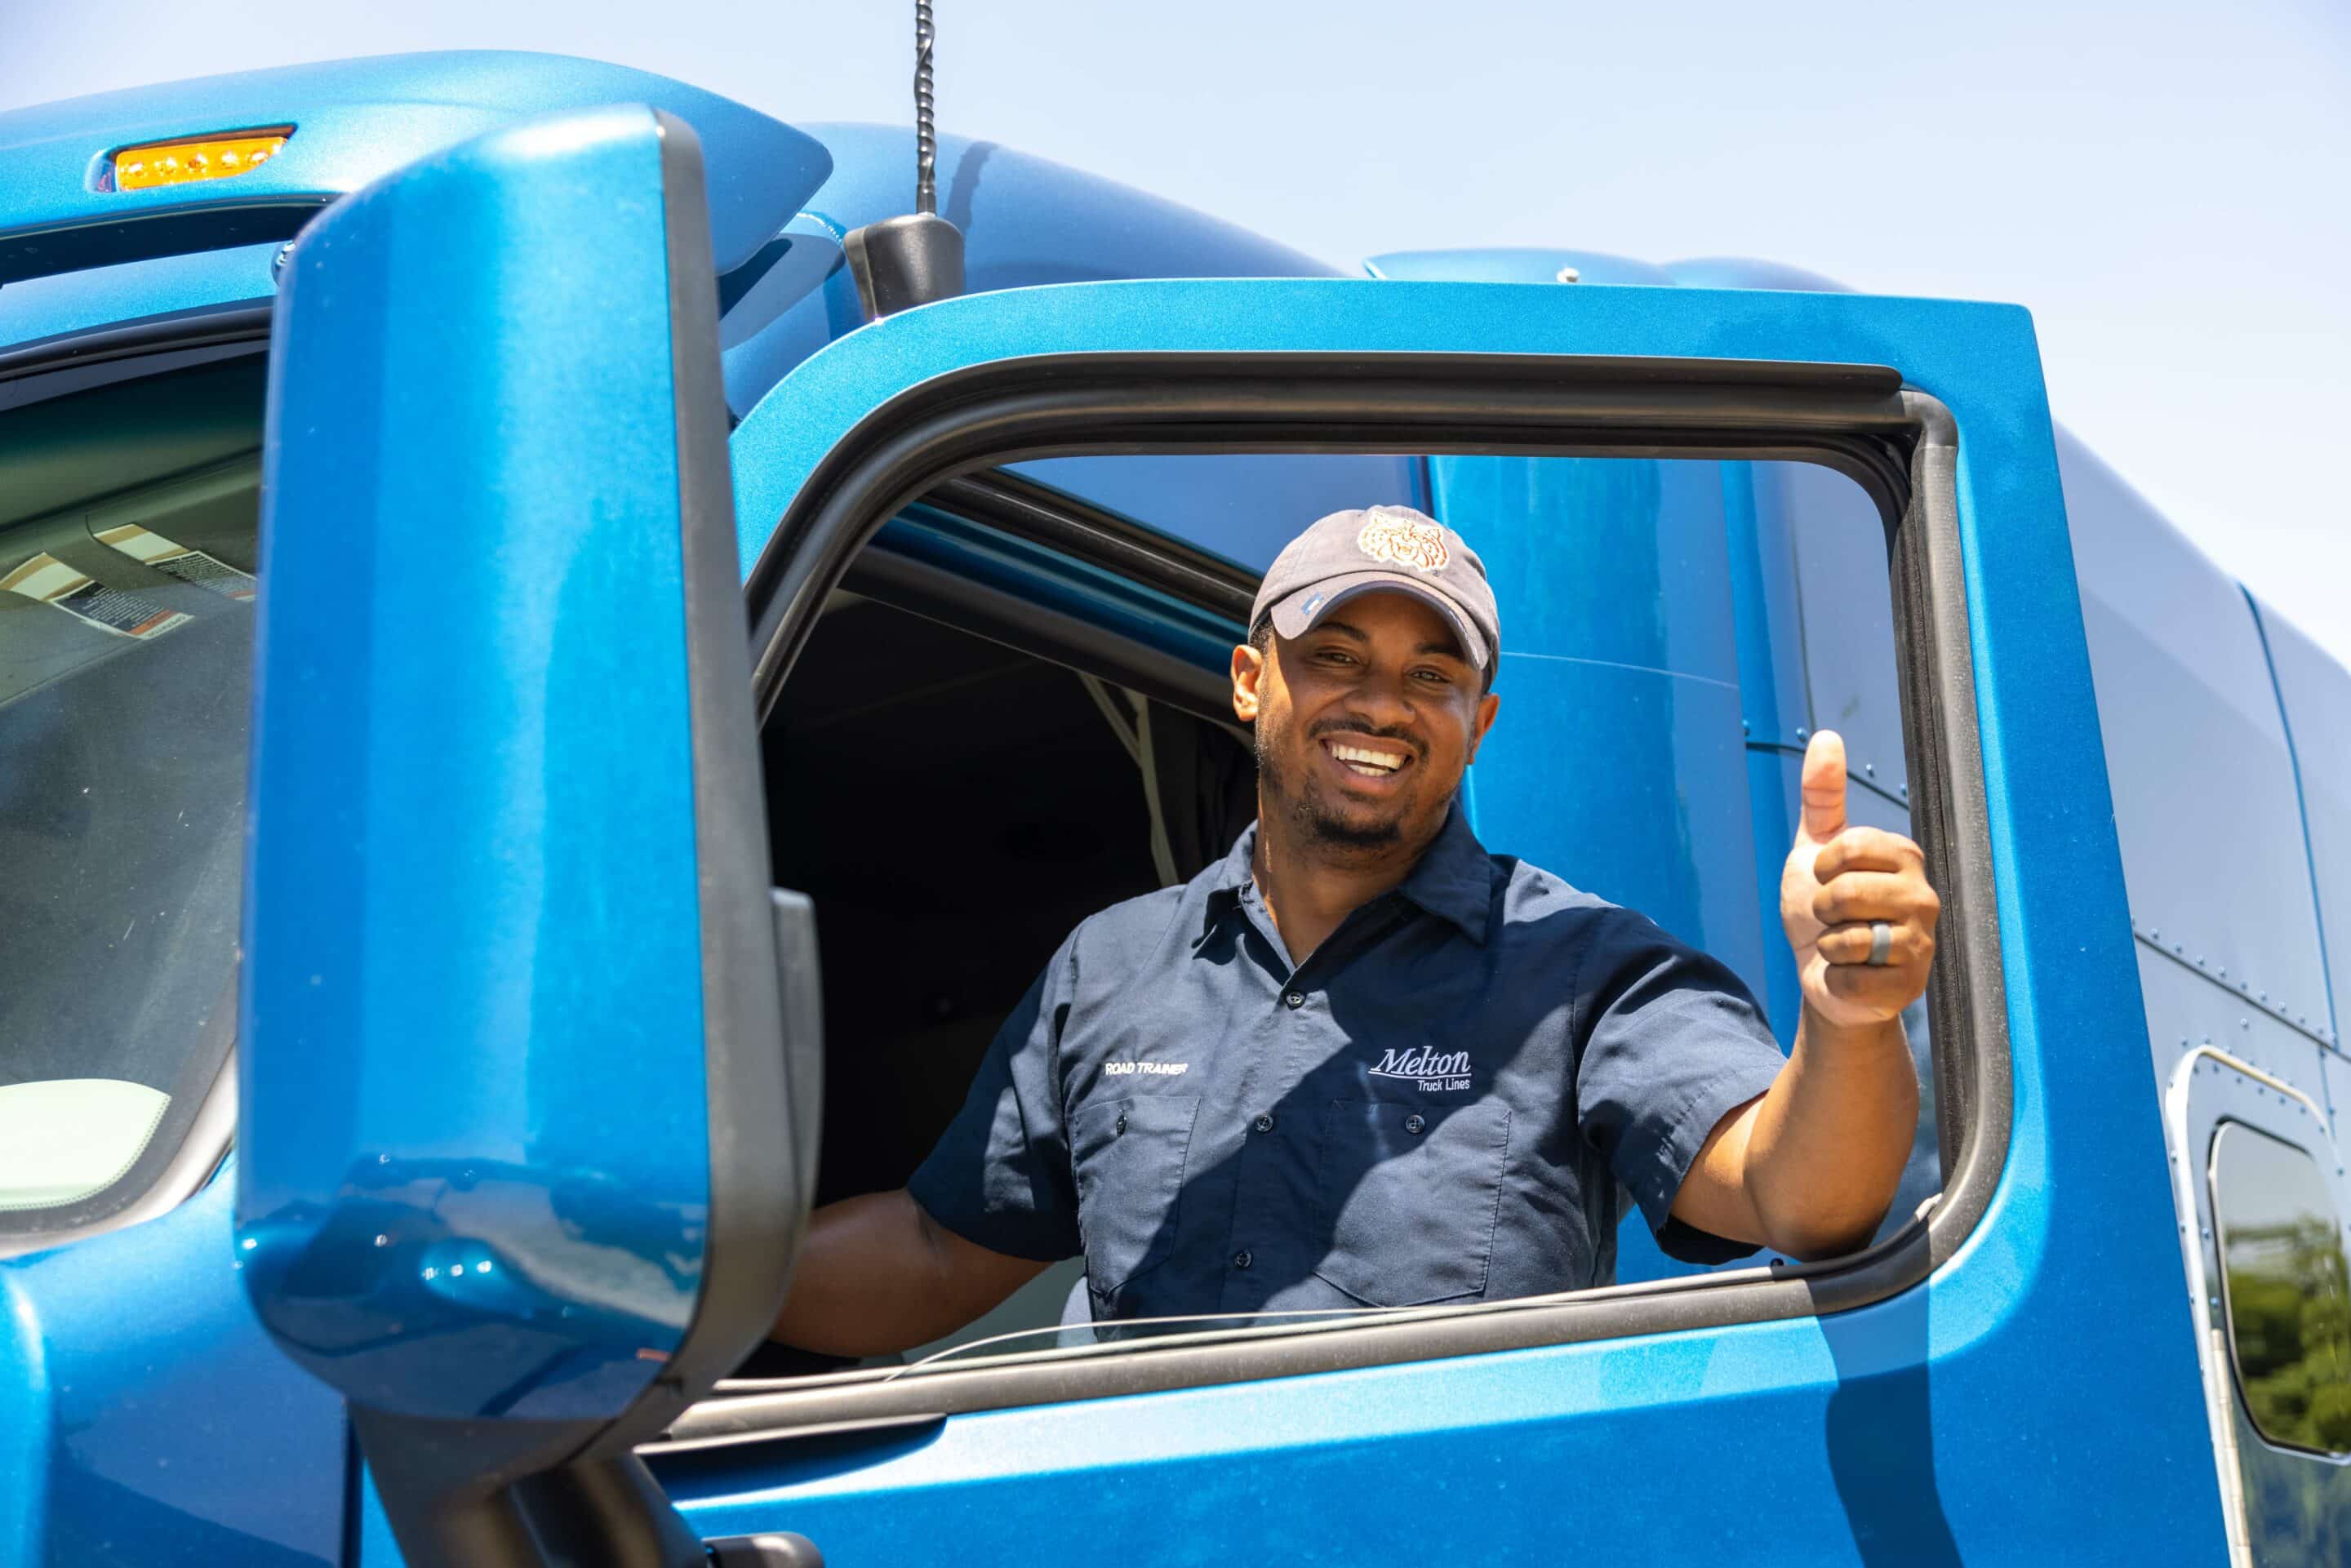 A Melton OTR truck driver giving a thumbs-up.